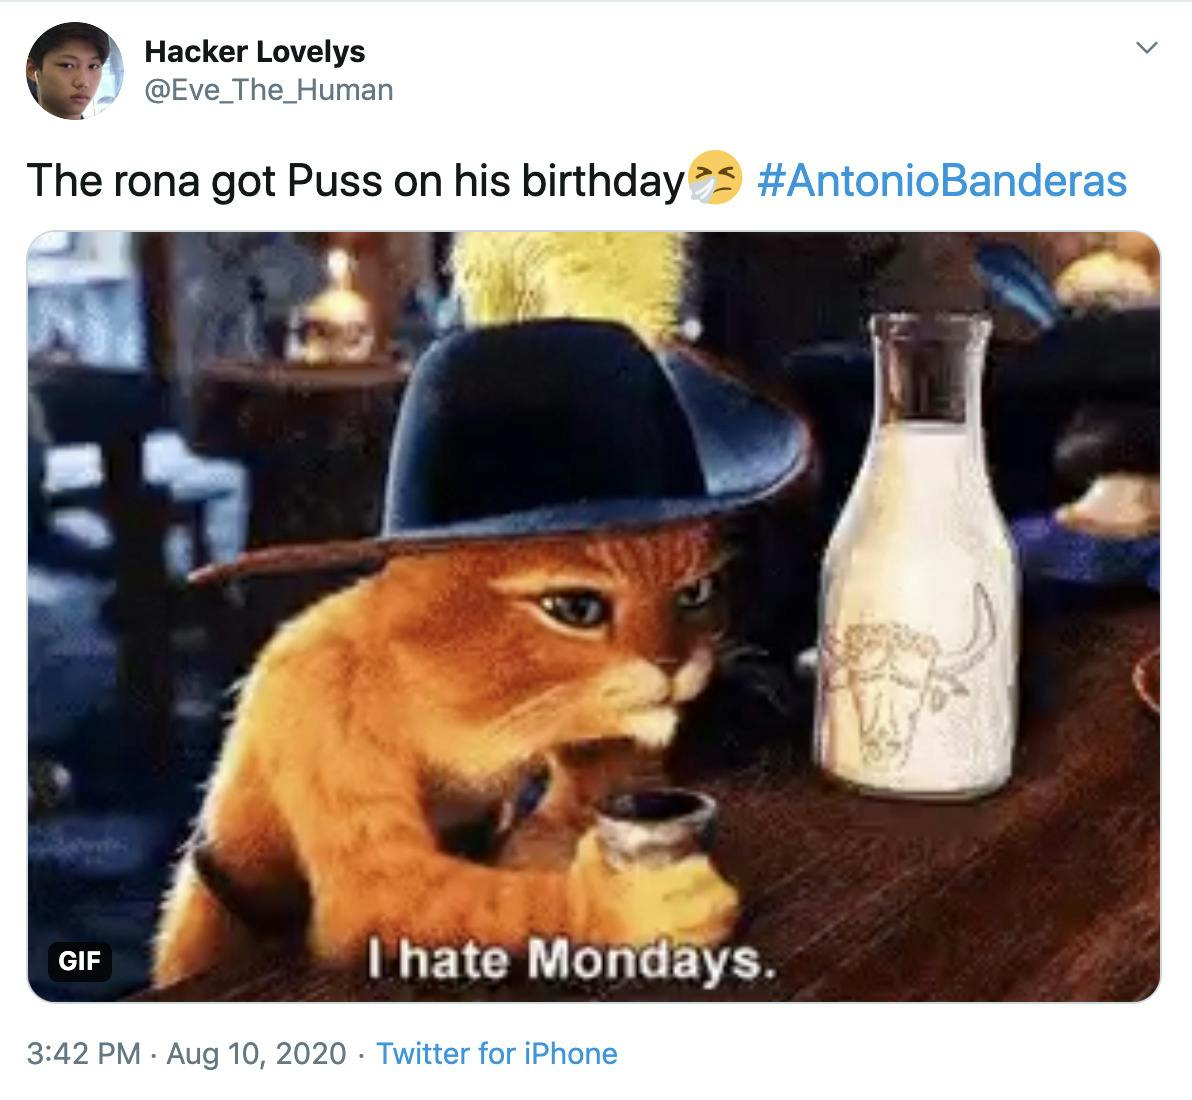 "The rona got Puss on his birthdaySneezing face #AntonioBanderas" gif of Puss in Boots from Shrek saying "I hate Mondays" while he drinks milk at a bar